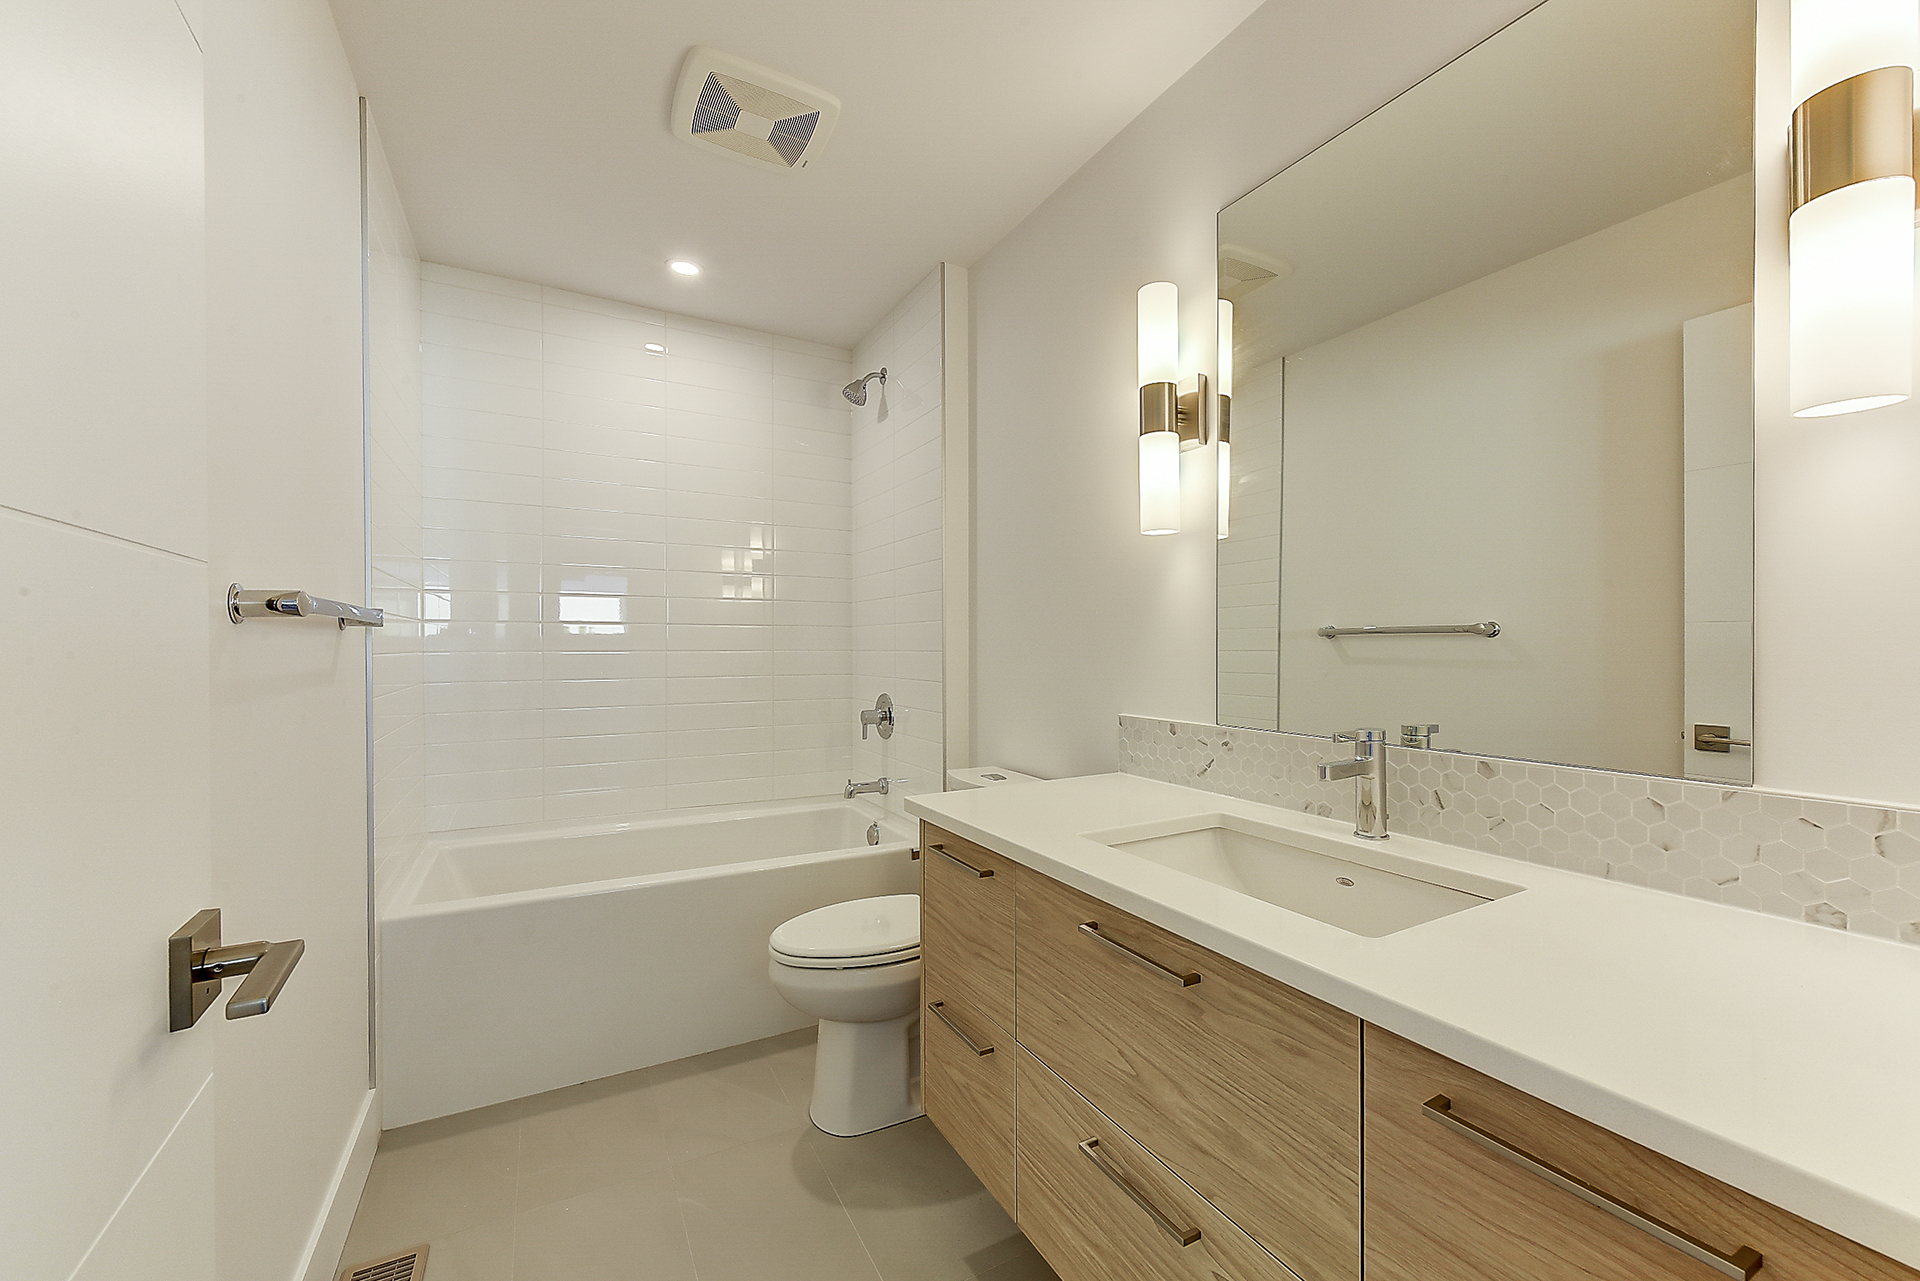 1_harmony_homes_aberdeen_street_infill_project_bath_room_gallery_image_23